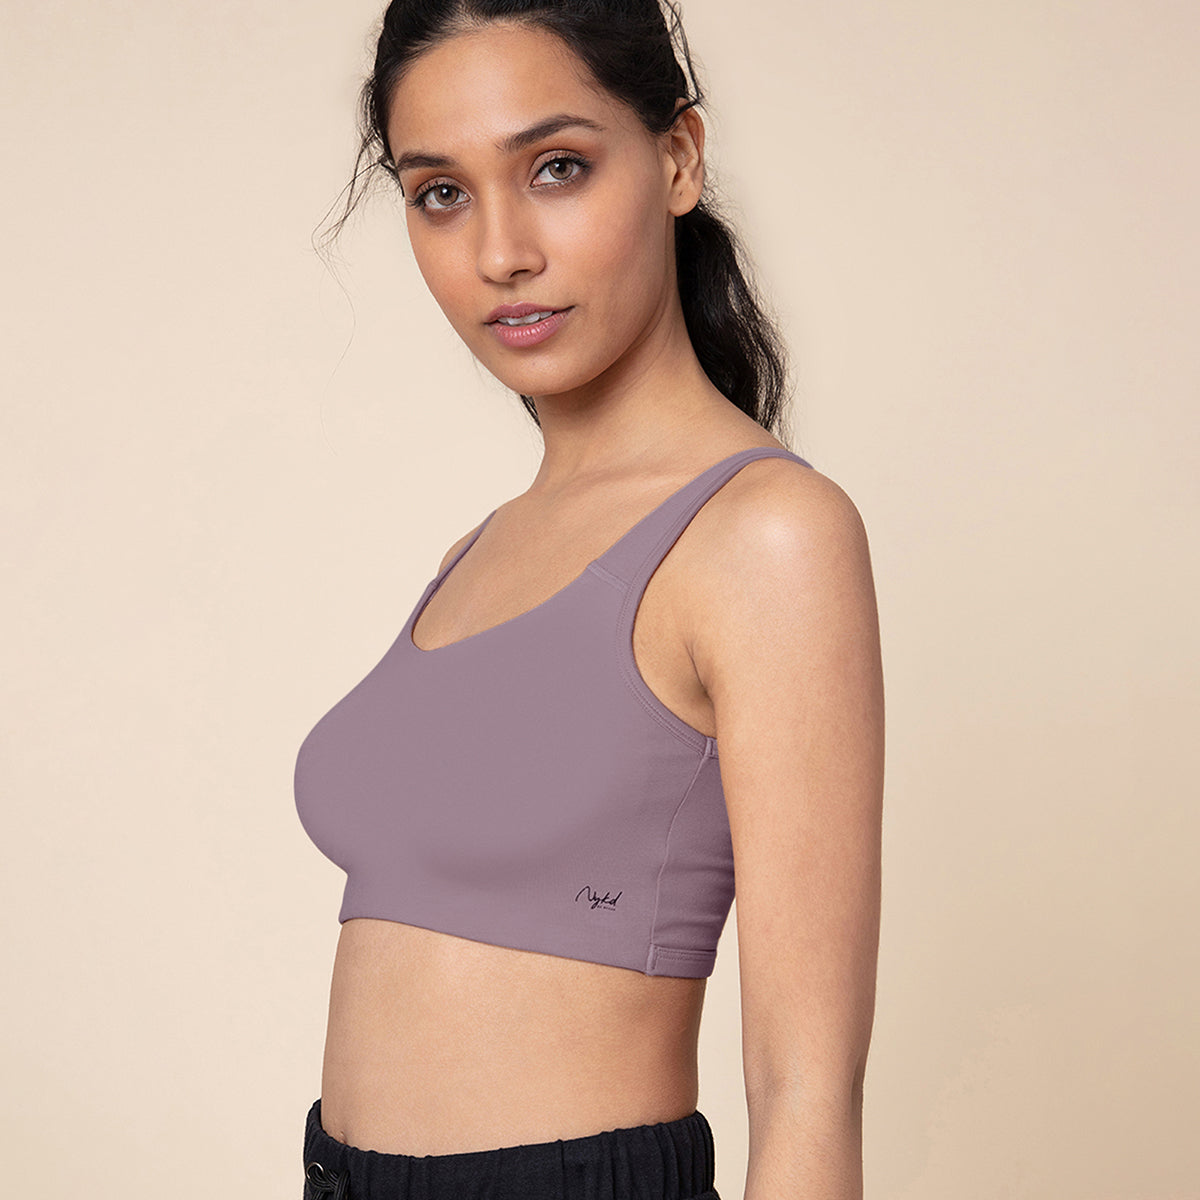 Soft cup easy-peasy slip-on bra with Full coverage - Purple NYB113